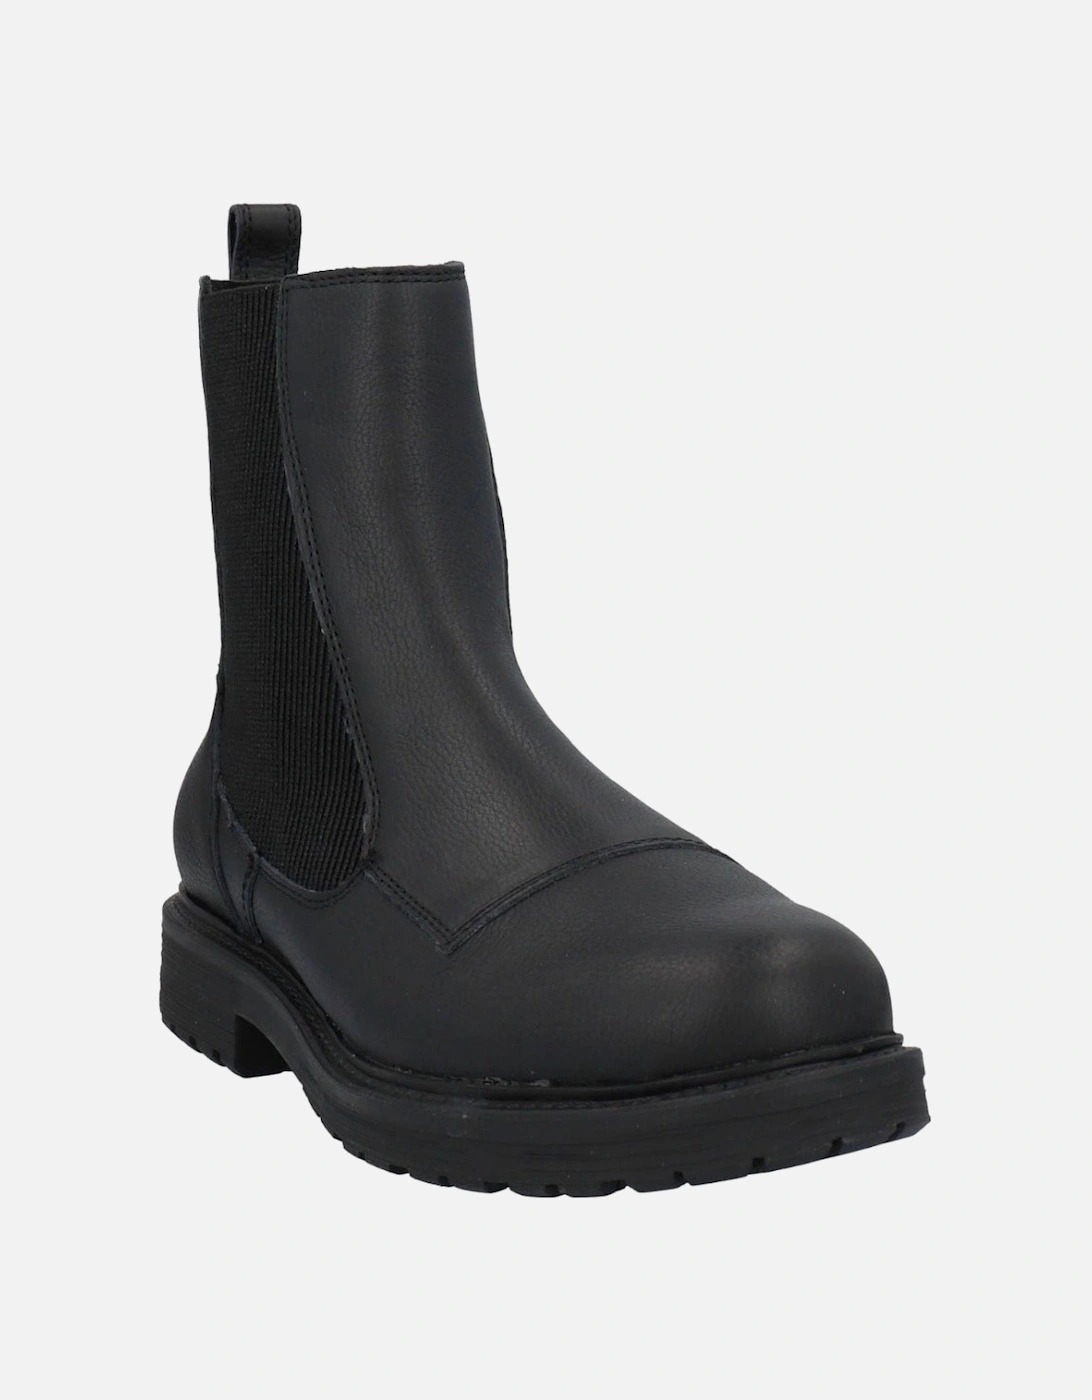 D-Alabhama CH Black Ankle Boots